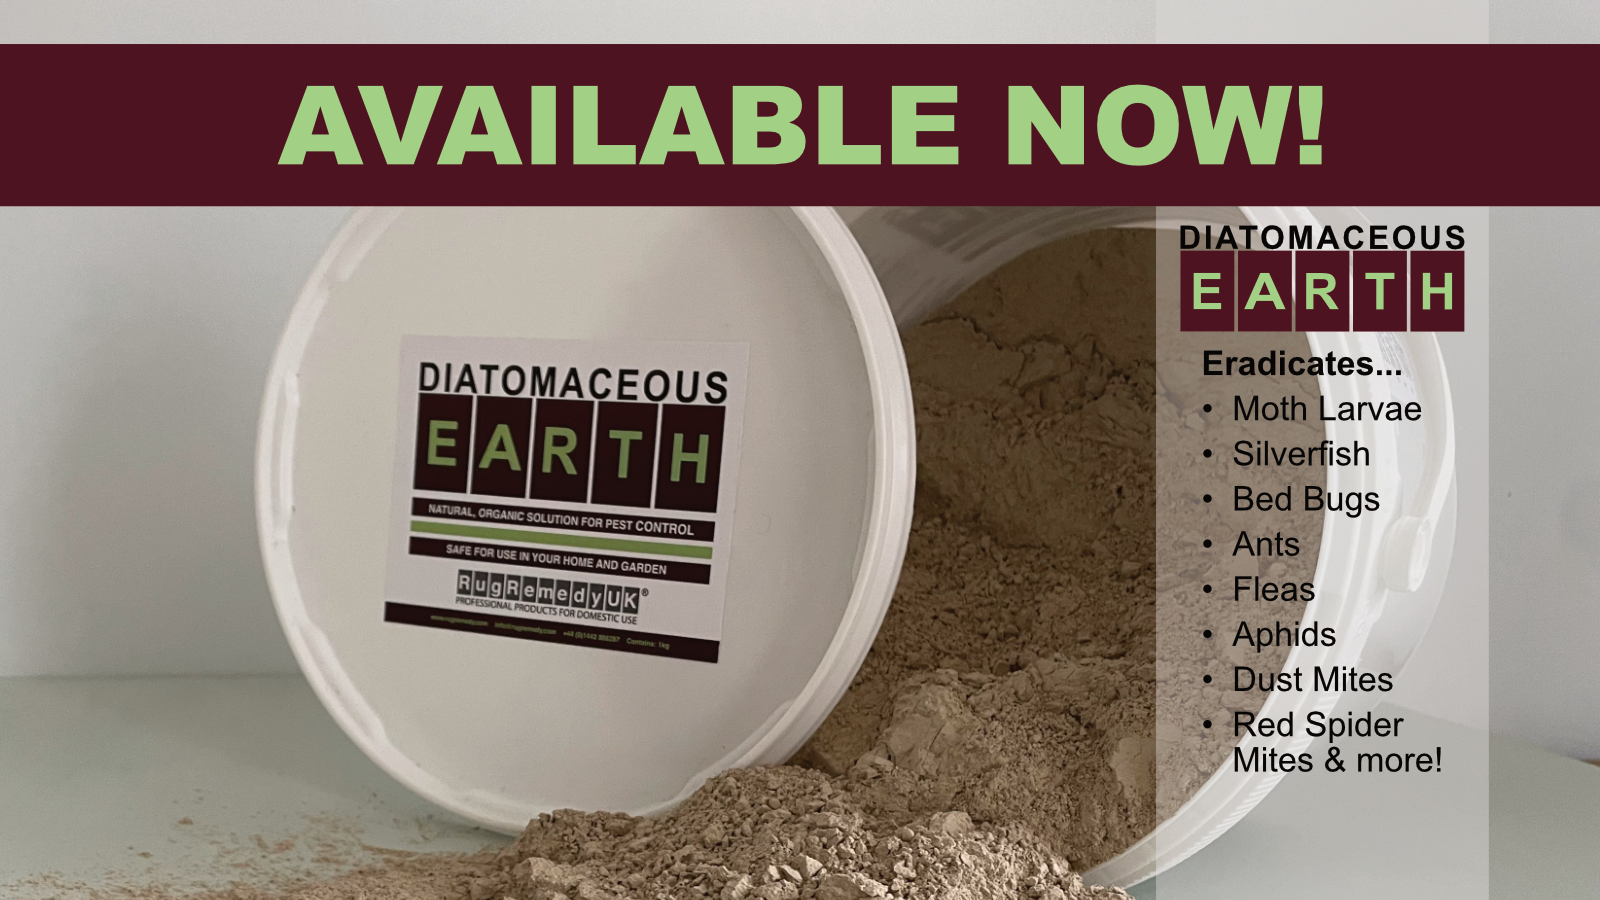 Diatomaceous Earth available soon. Picture of a tub of Diatomaceous Earth with a list of insects that it can eradicate... 
•	Moth Larvae
•	Silverfish
•	Bed Bugs
•	Ants
•	Fleas
•	Aphids
•	Dust Mites
•	Red Spider Mites & more!
